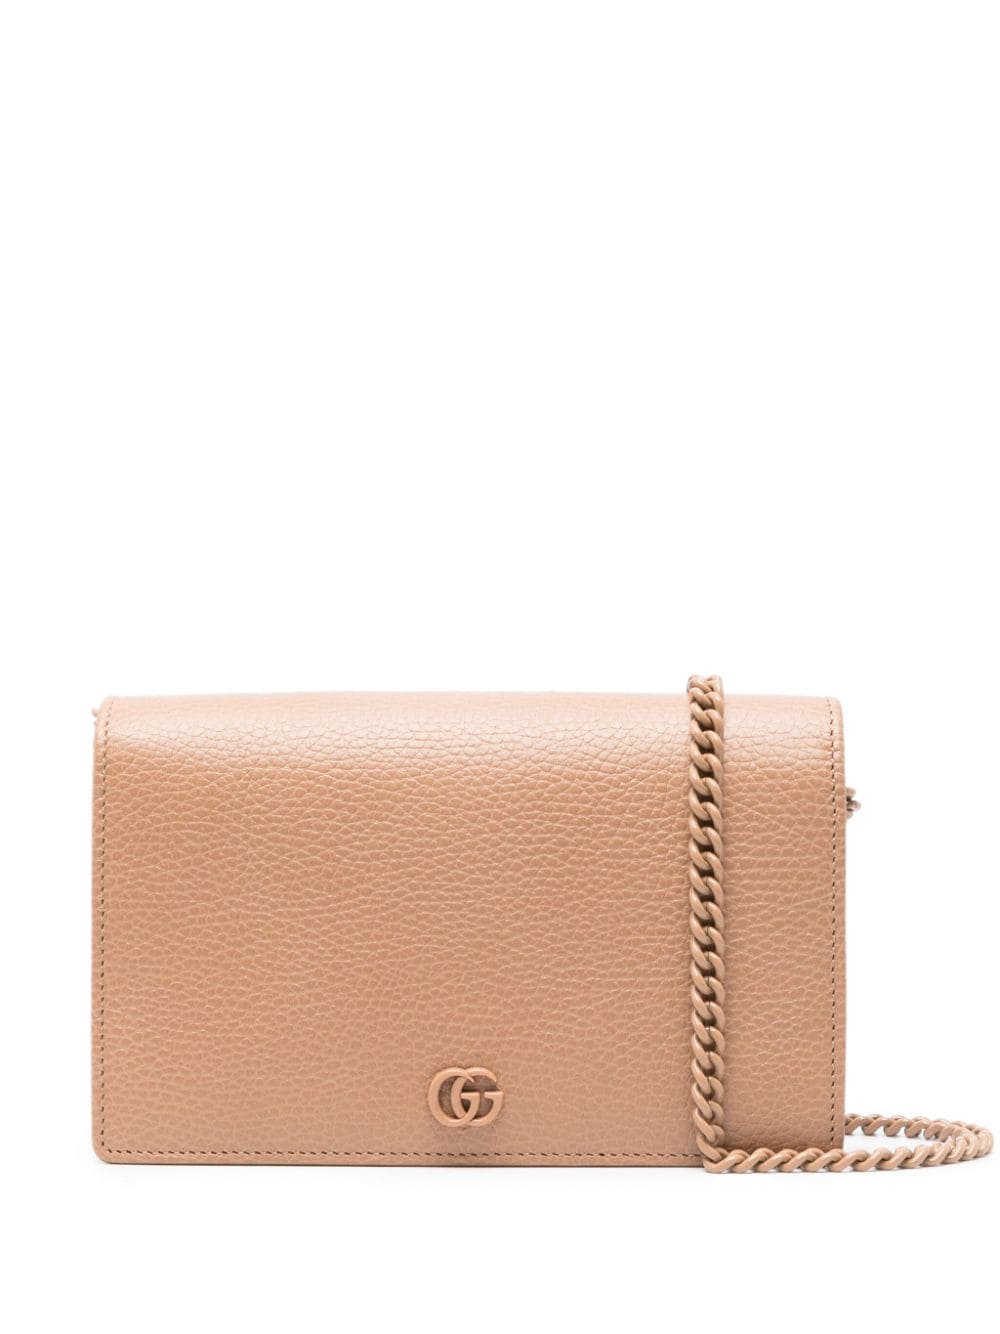 Image 1 of Gucci GG Marmont chain wallet